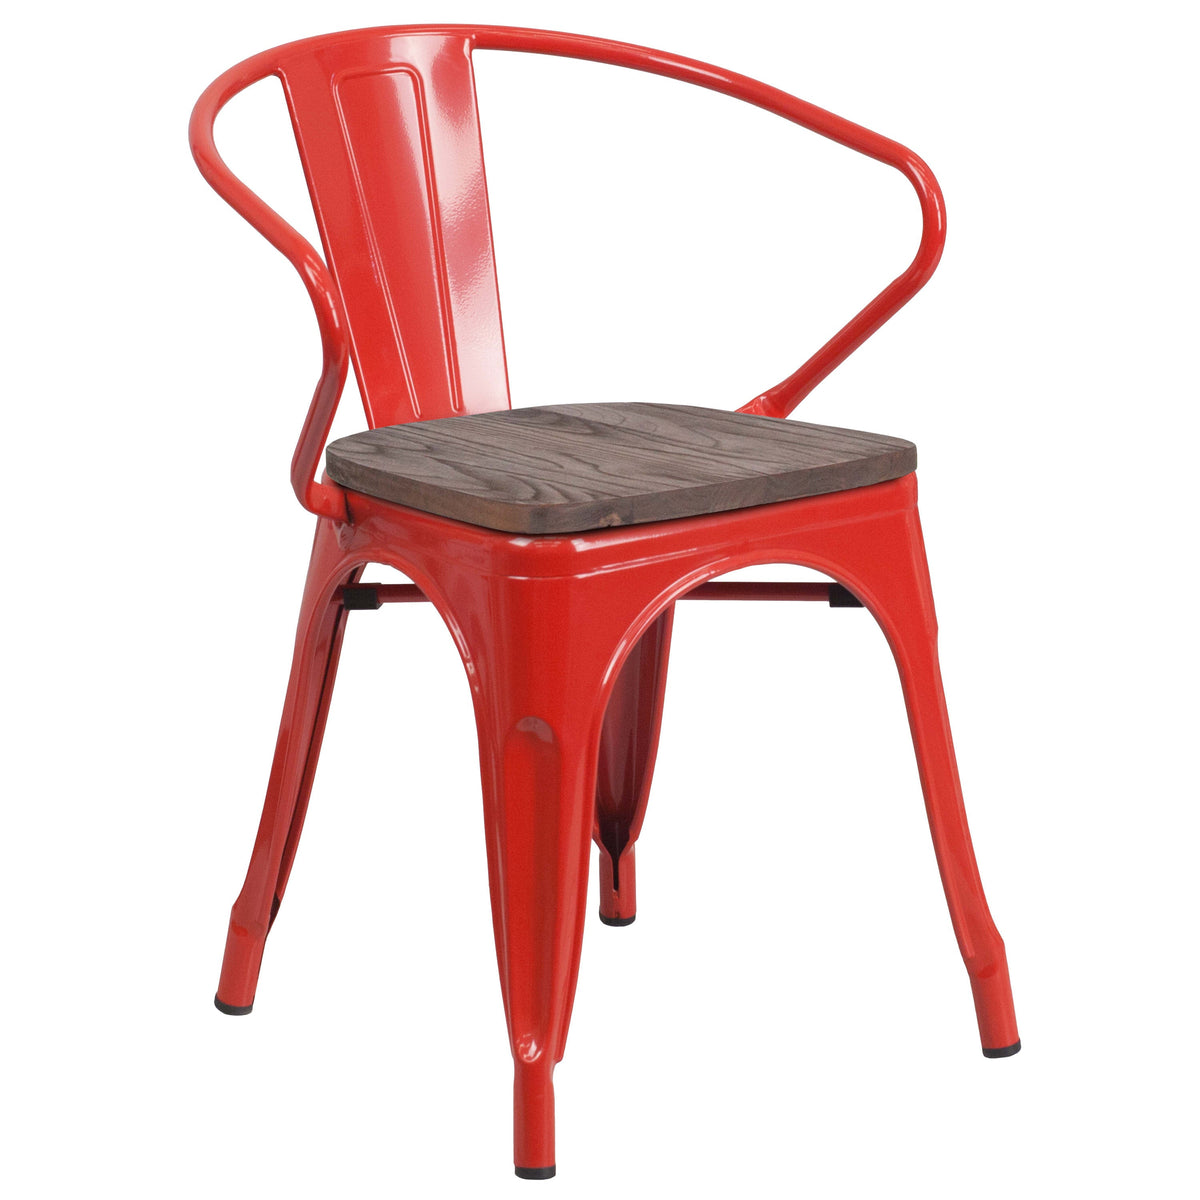 Red |#| Red Metal Chair with Wood Seat and Arms - Restaurant Furniture